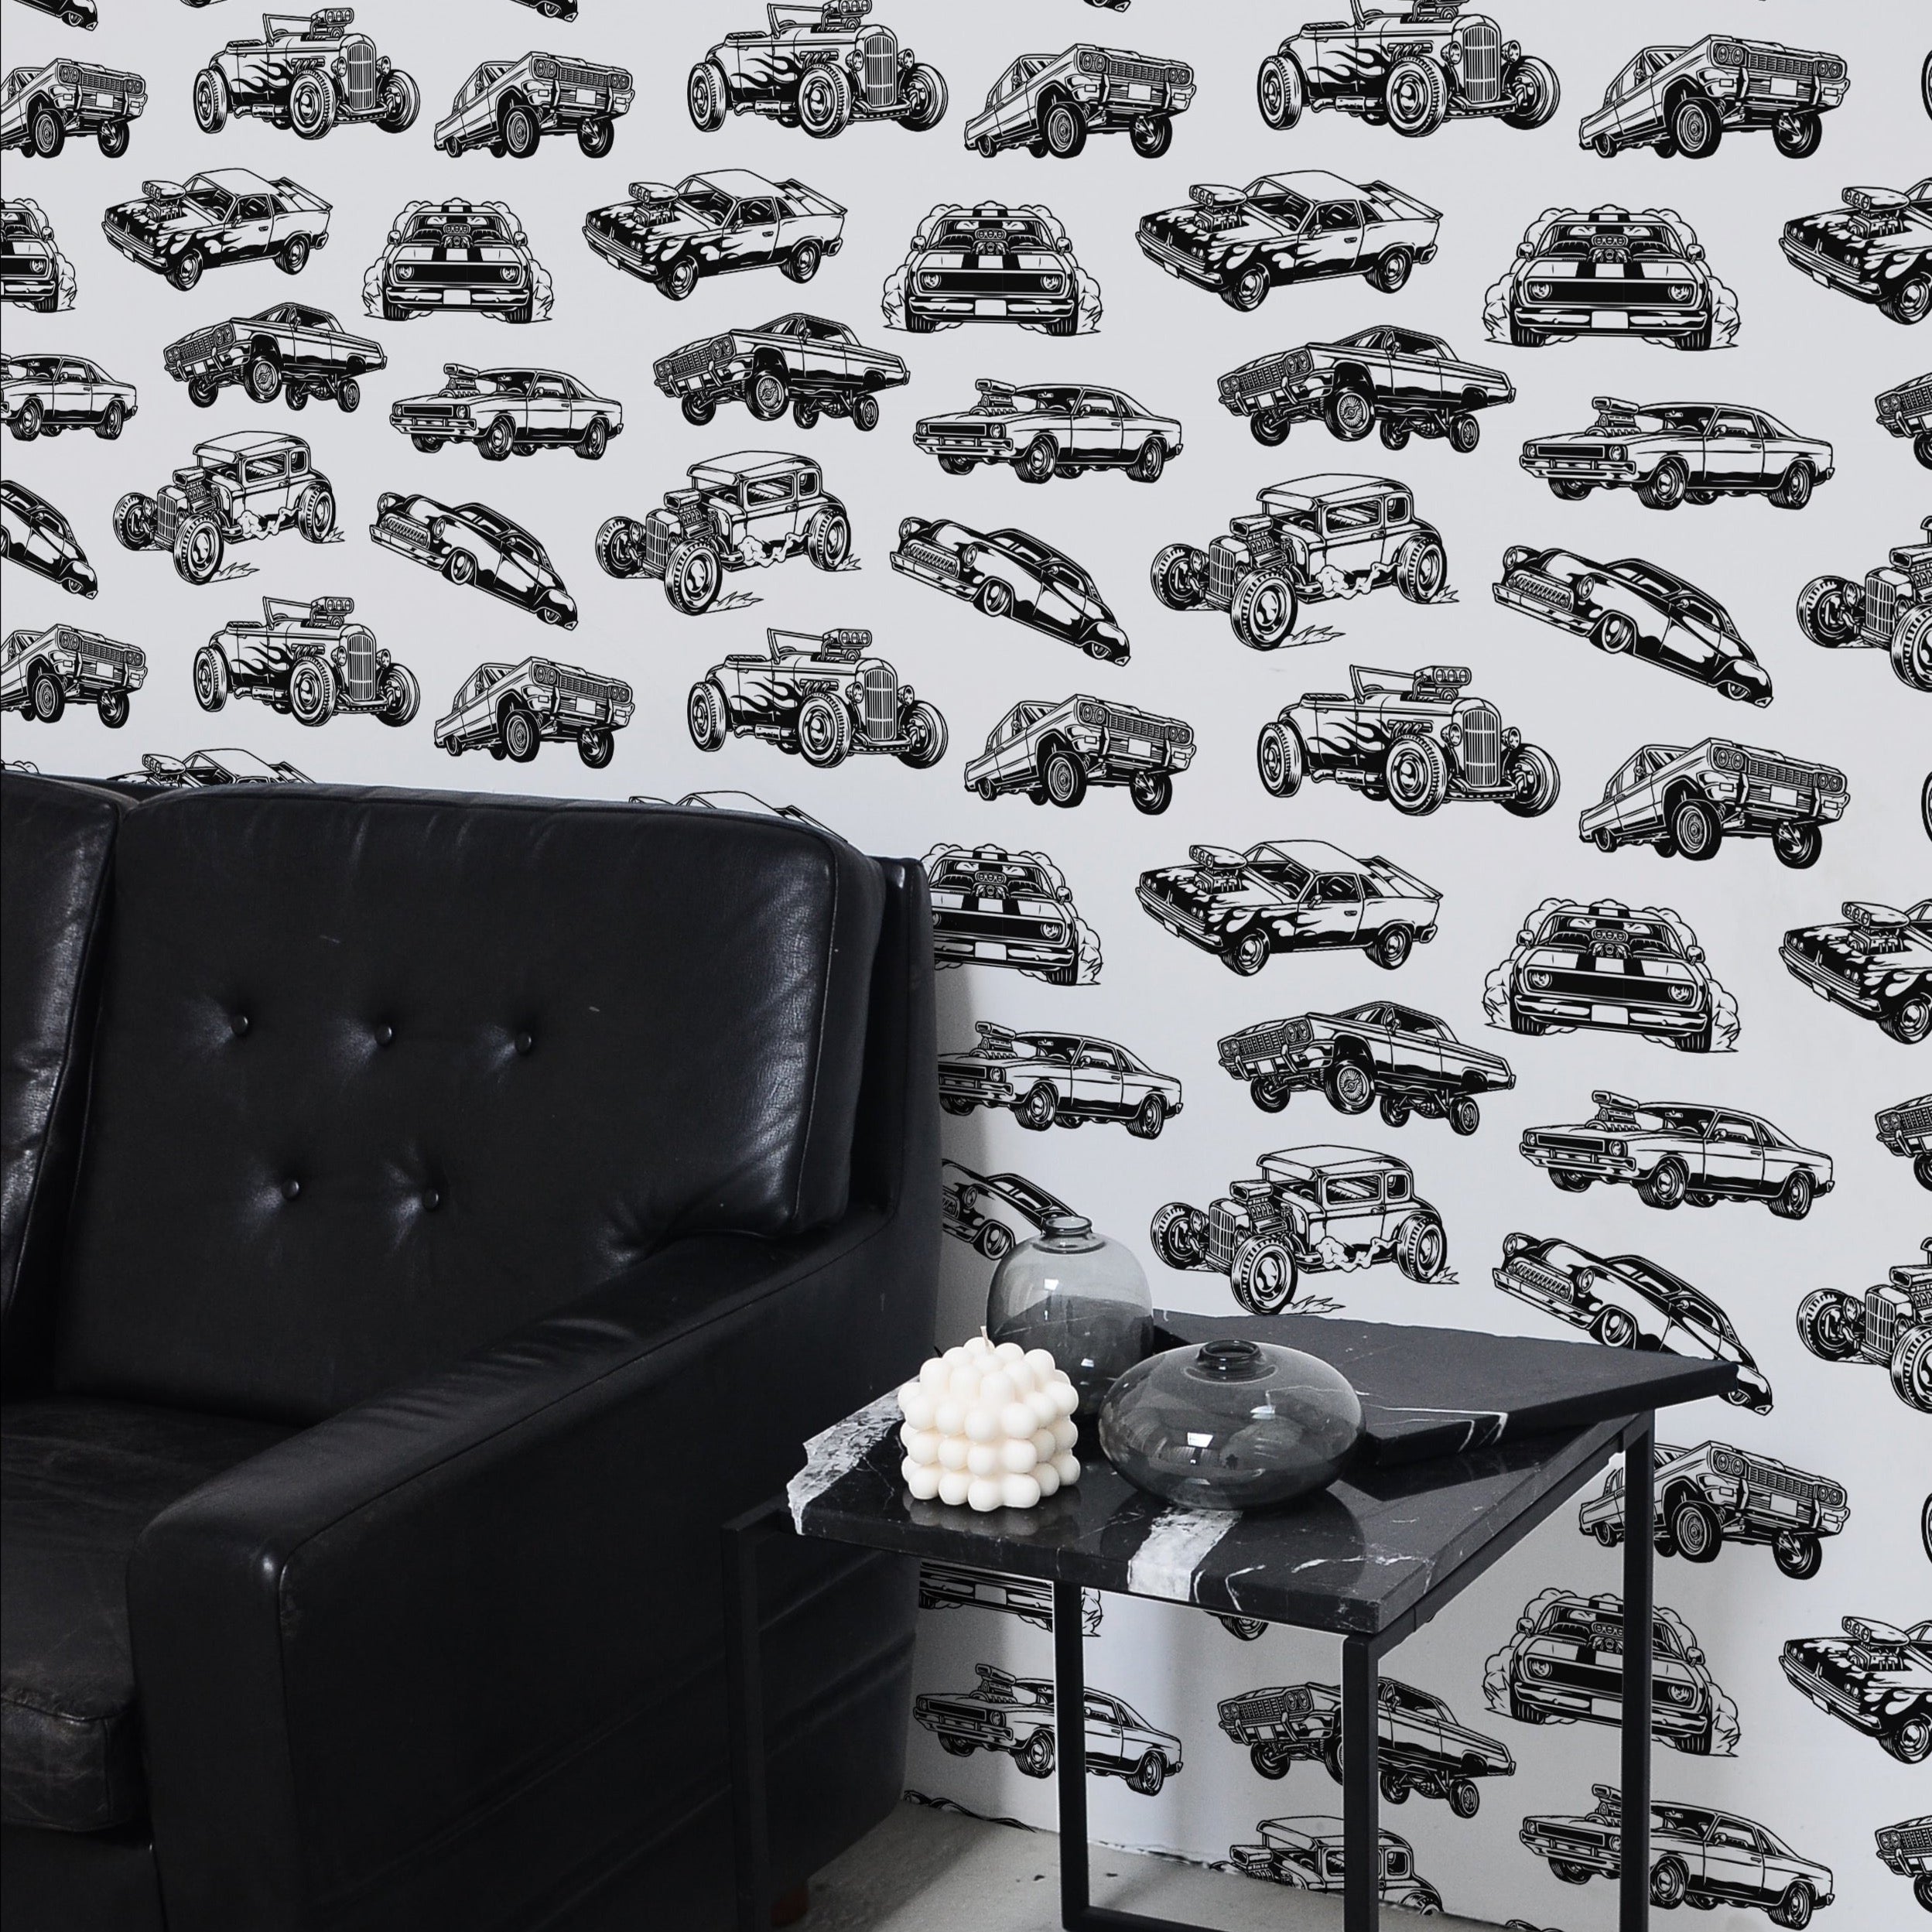 A contemporary living room setup with Vintage Cars Wallpaper as the focal wall. The decor includes a black leather sofa and a sleek black coffee table, complementing the monochrome car prints and creating a modern yet retro vibe.